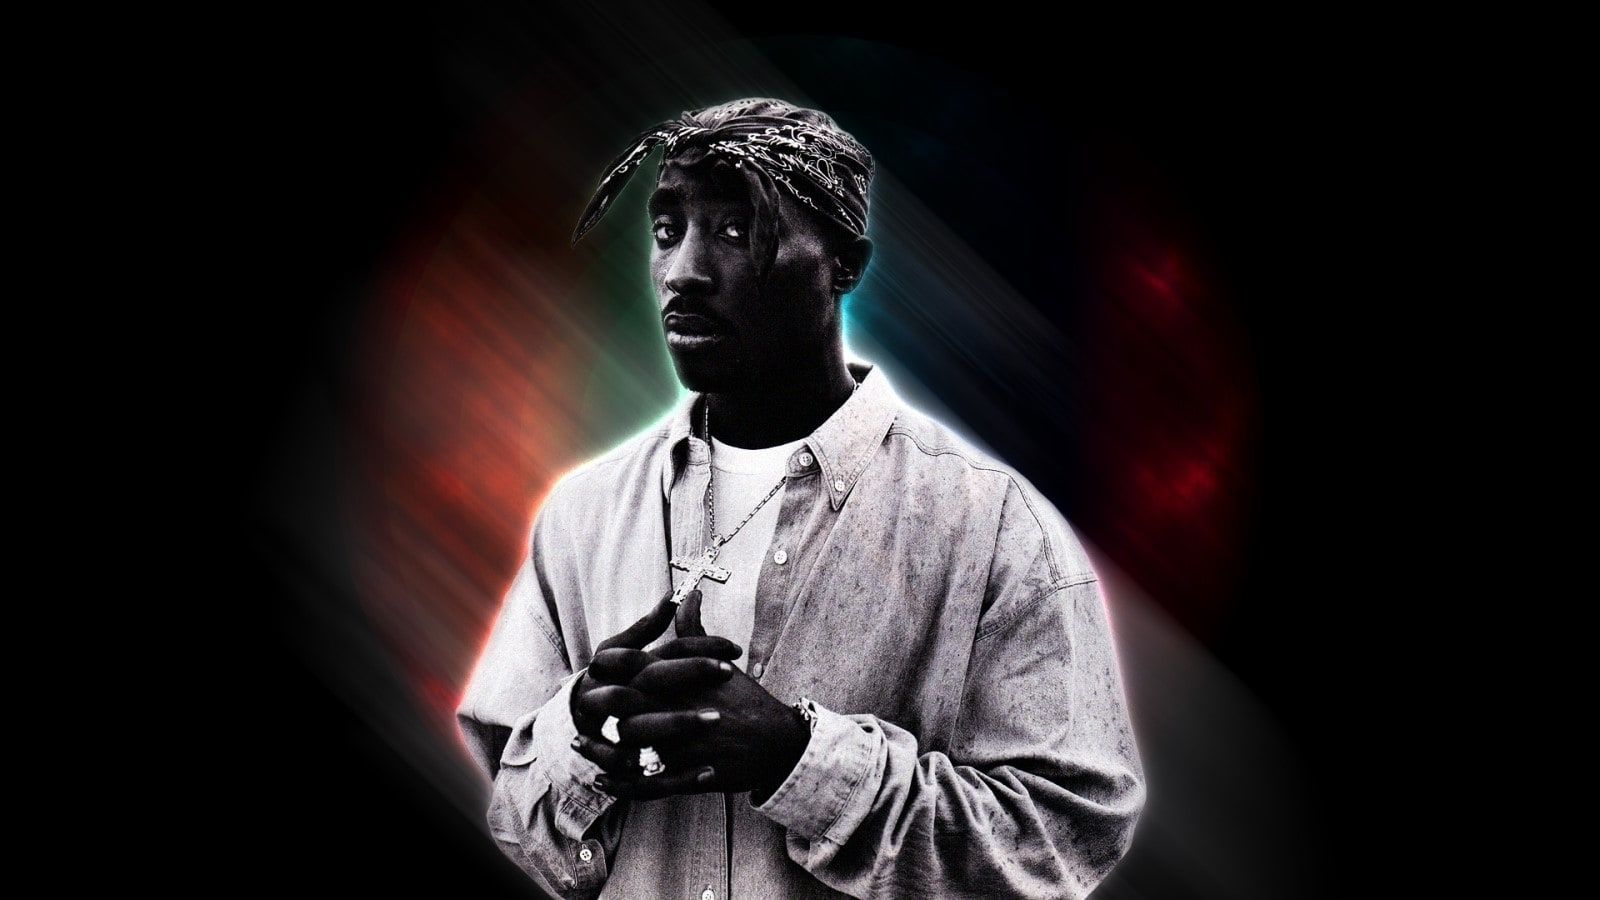 2pac wallpaper for mobile phone, tablet, desktop computer and other devices HD and 4K wallpaper.pac wallpaper, Tupac wallpaper, 2pac